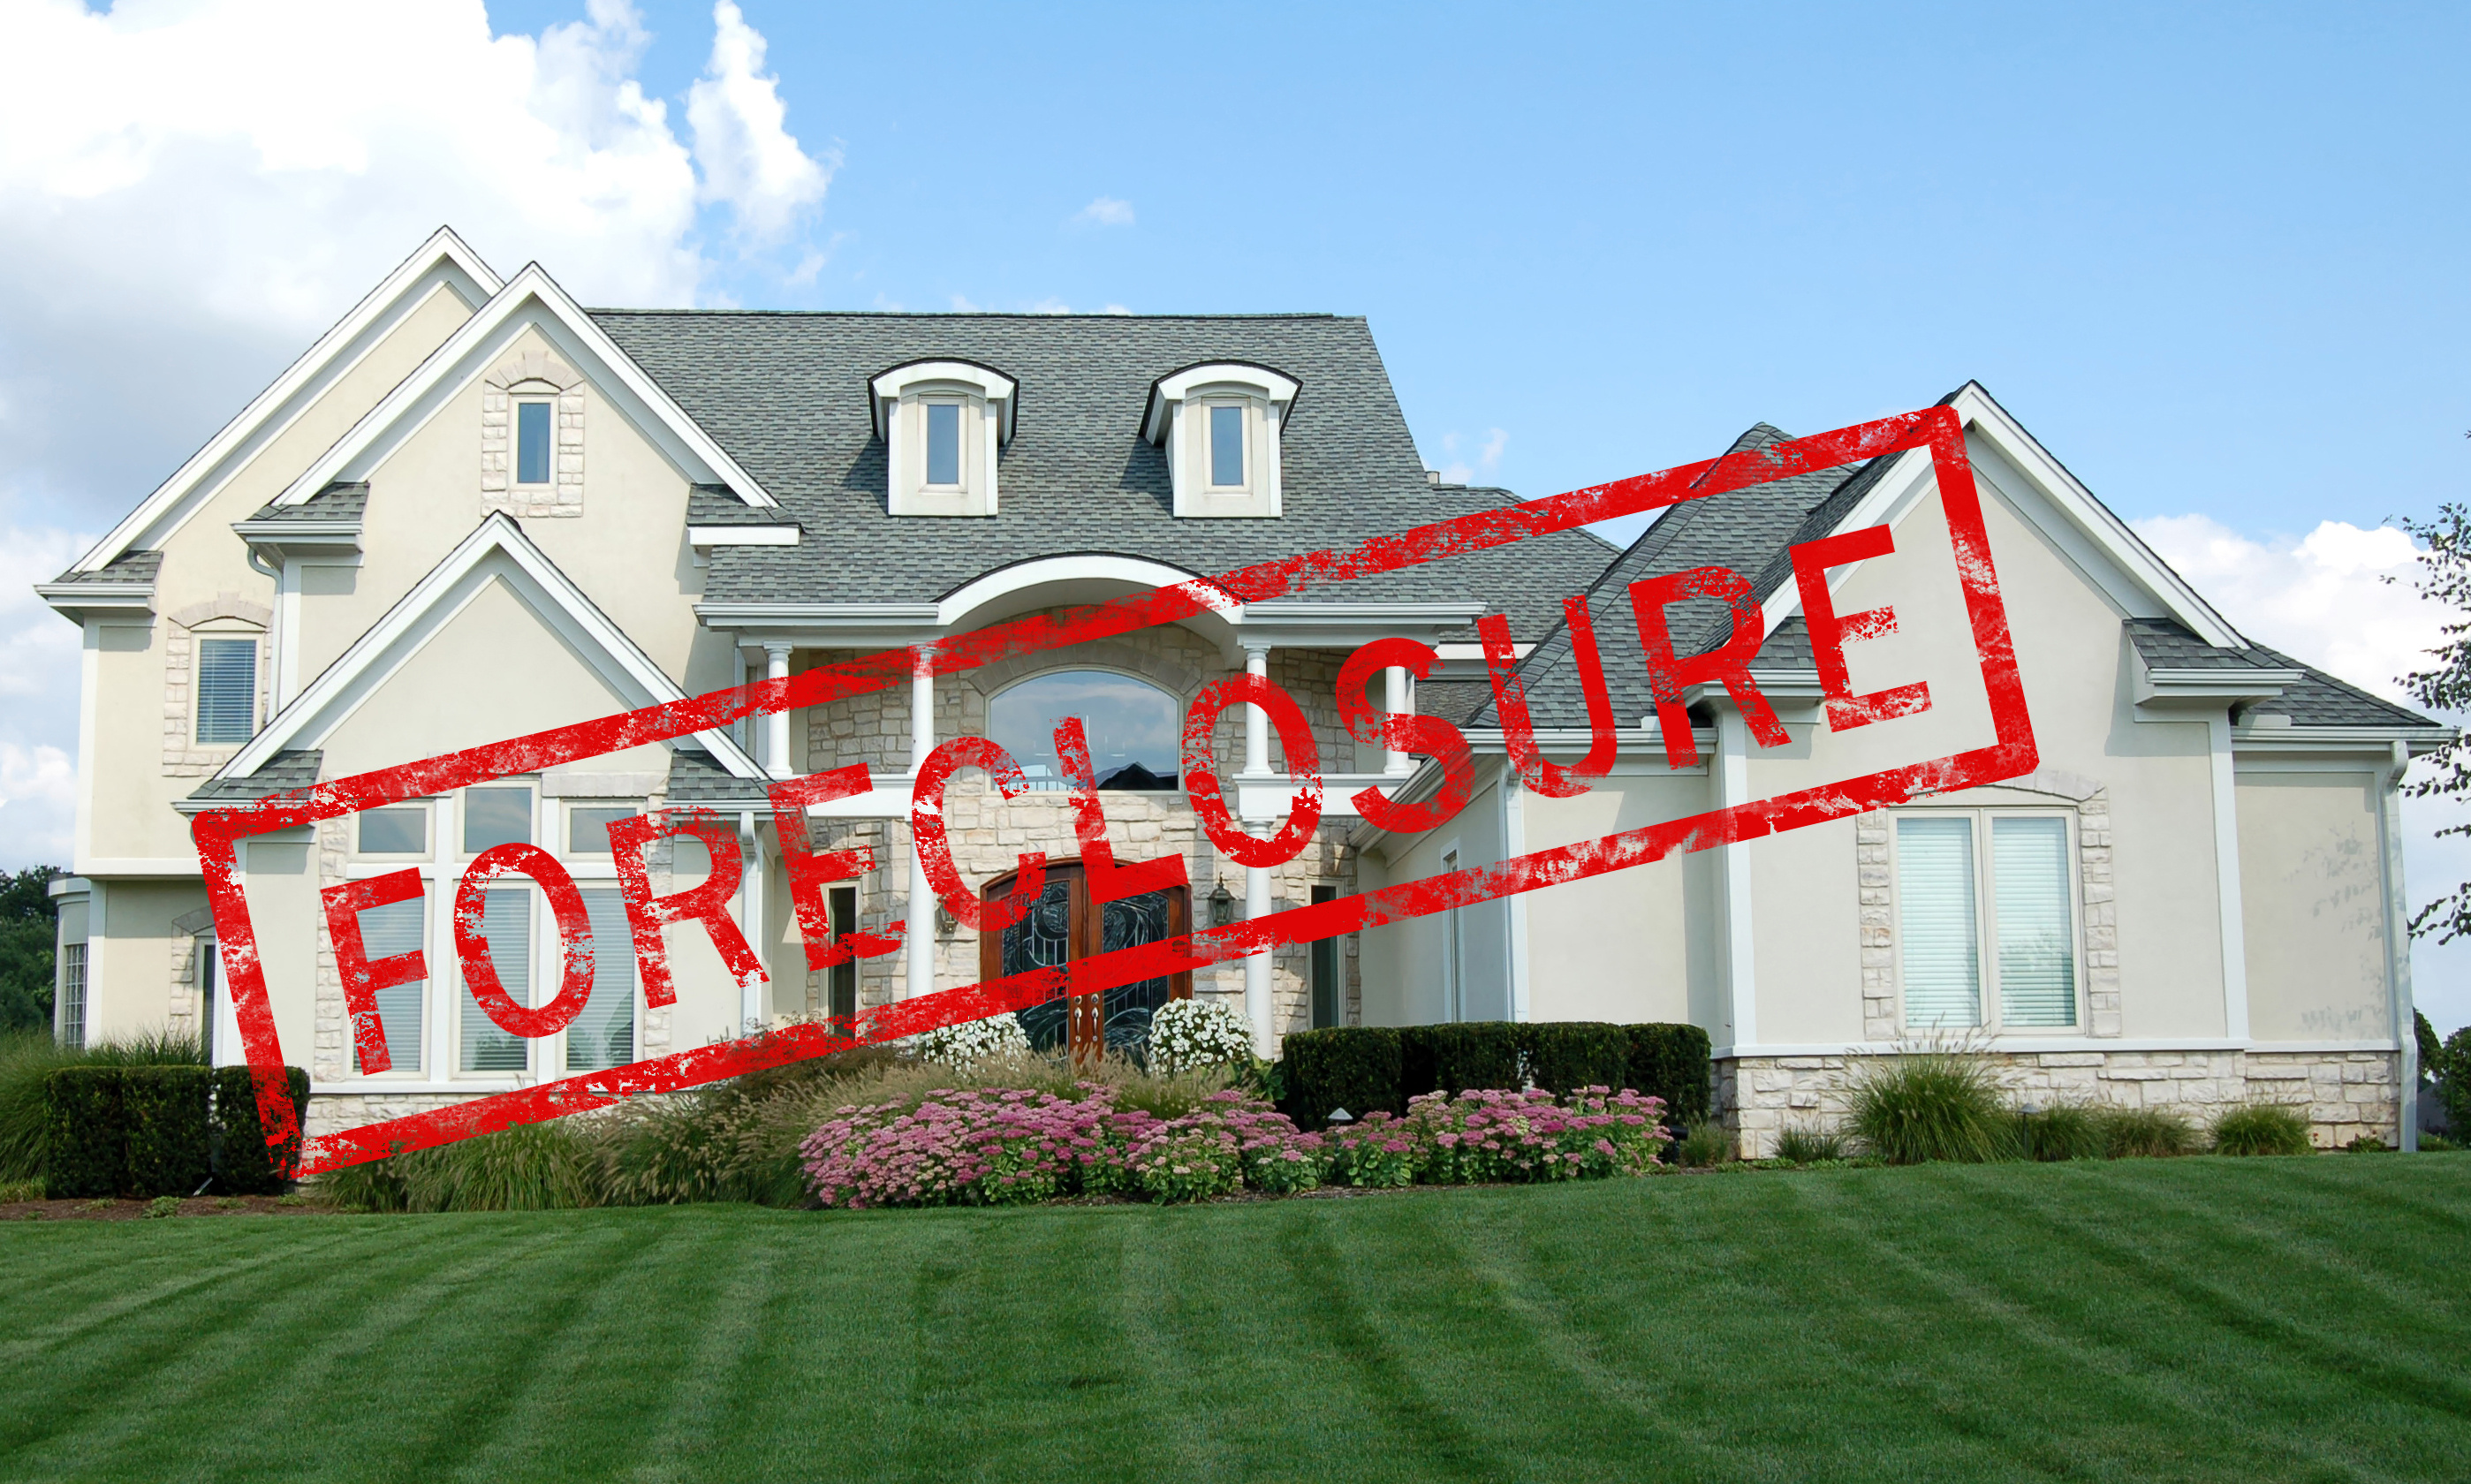 Call Culling Appraisal Corp to order valuations for Dupage foreclosures